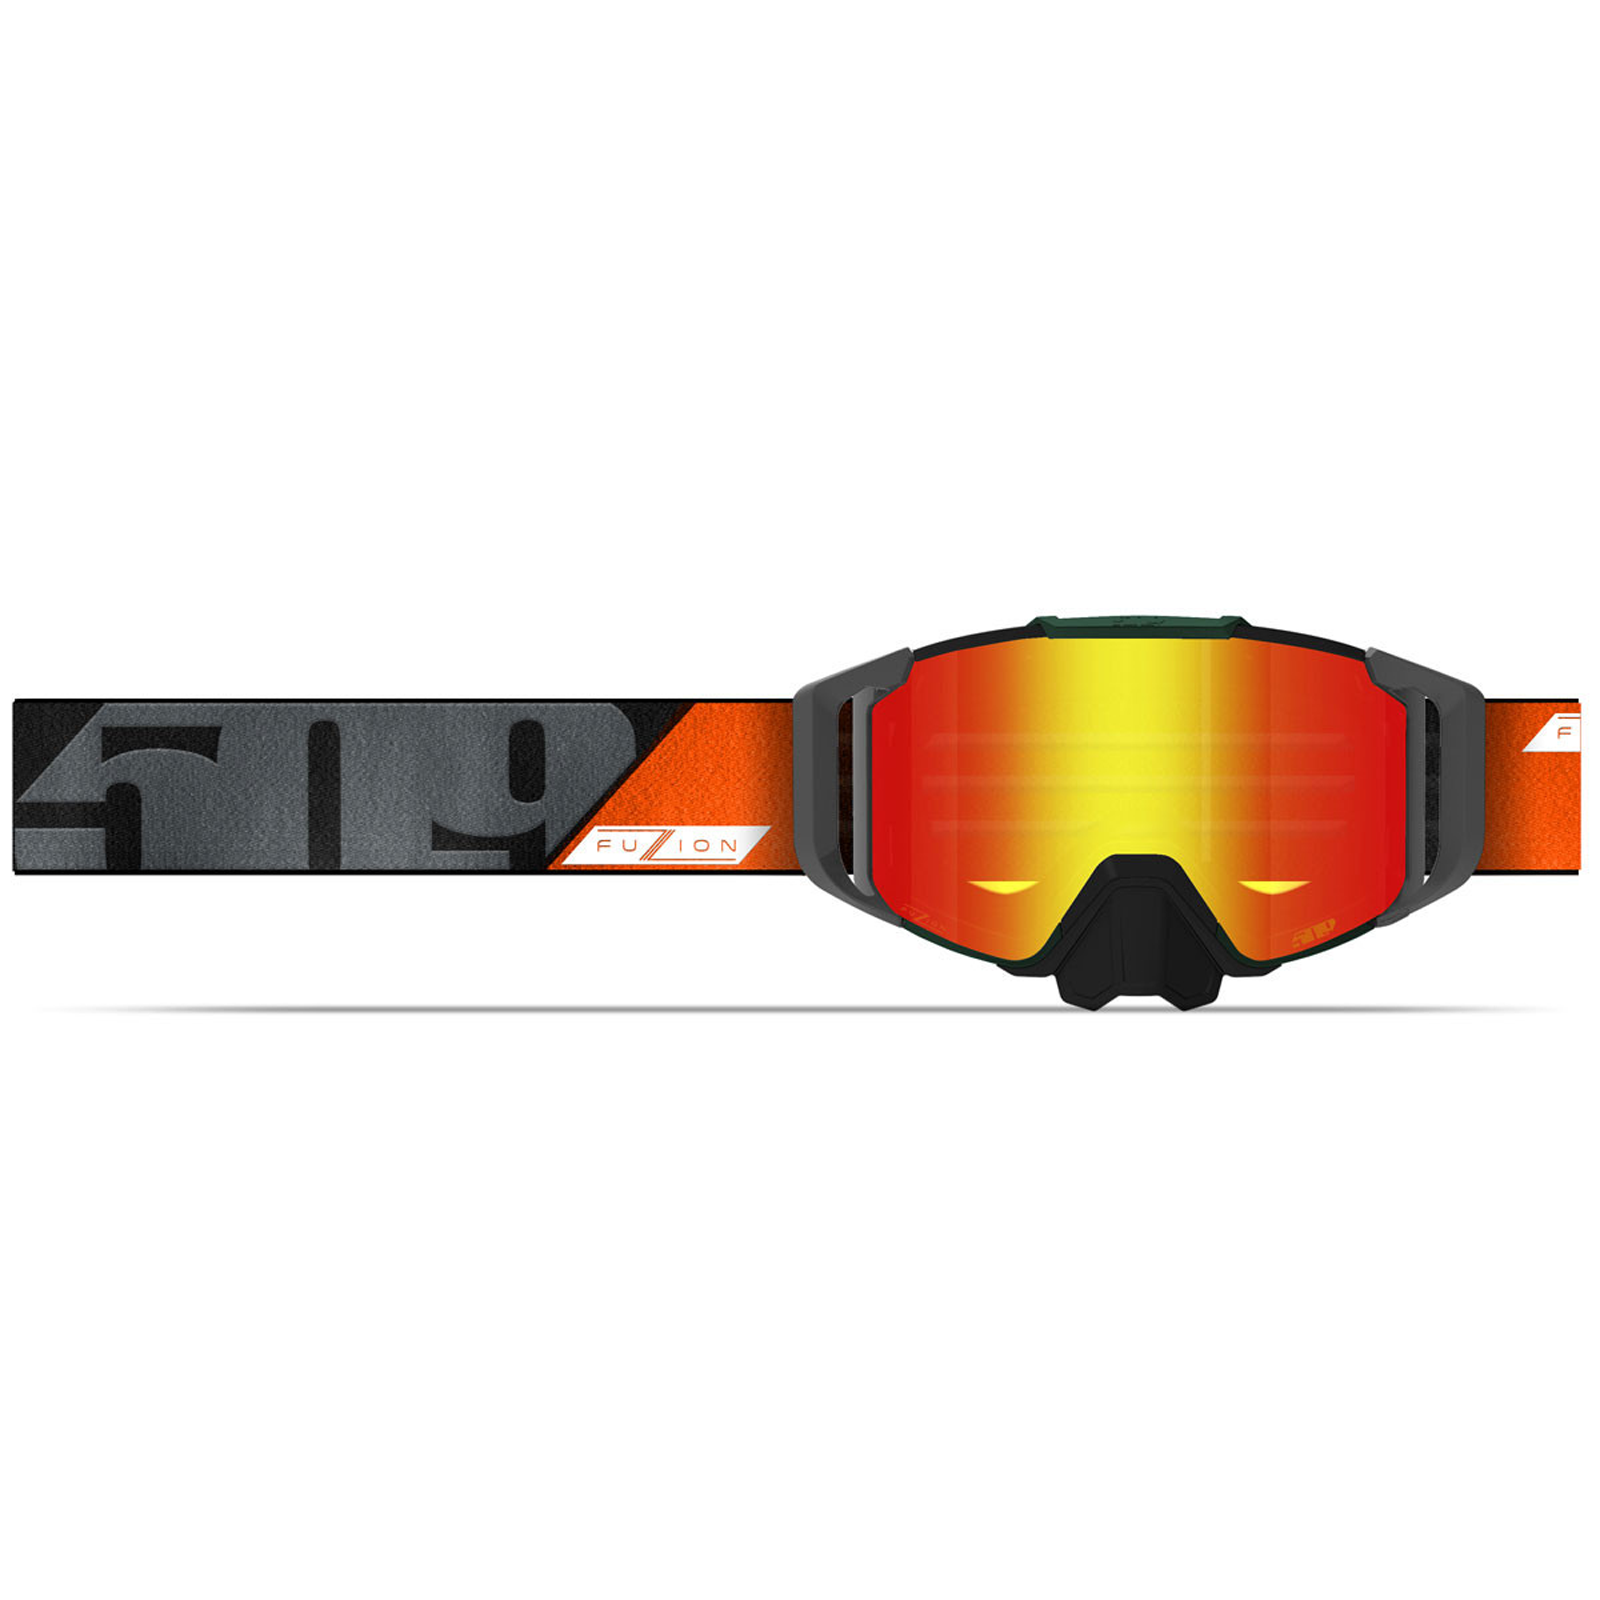 Short Straps for Sinister X6 Goggle